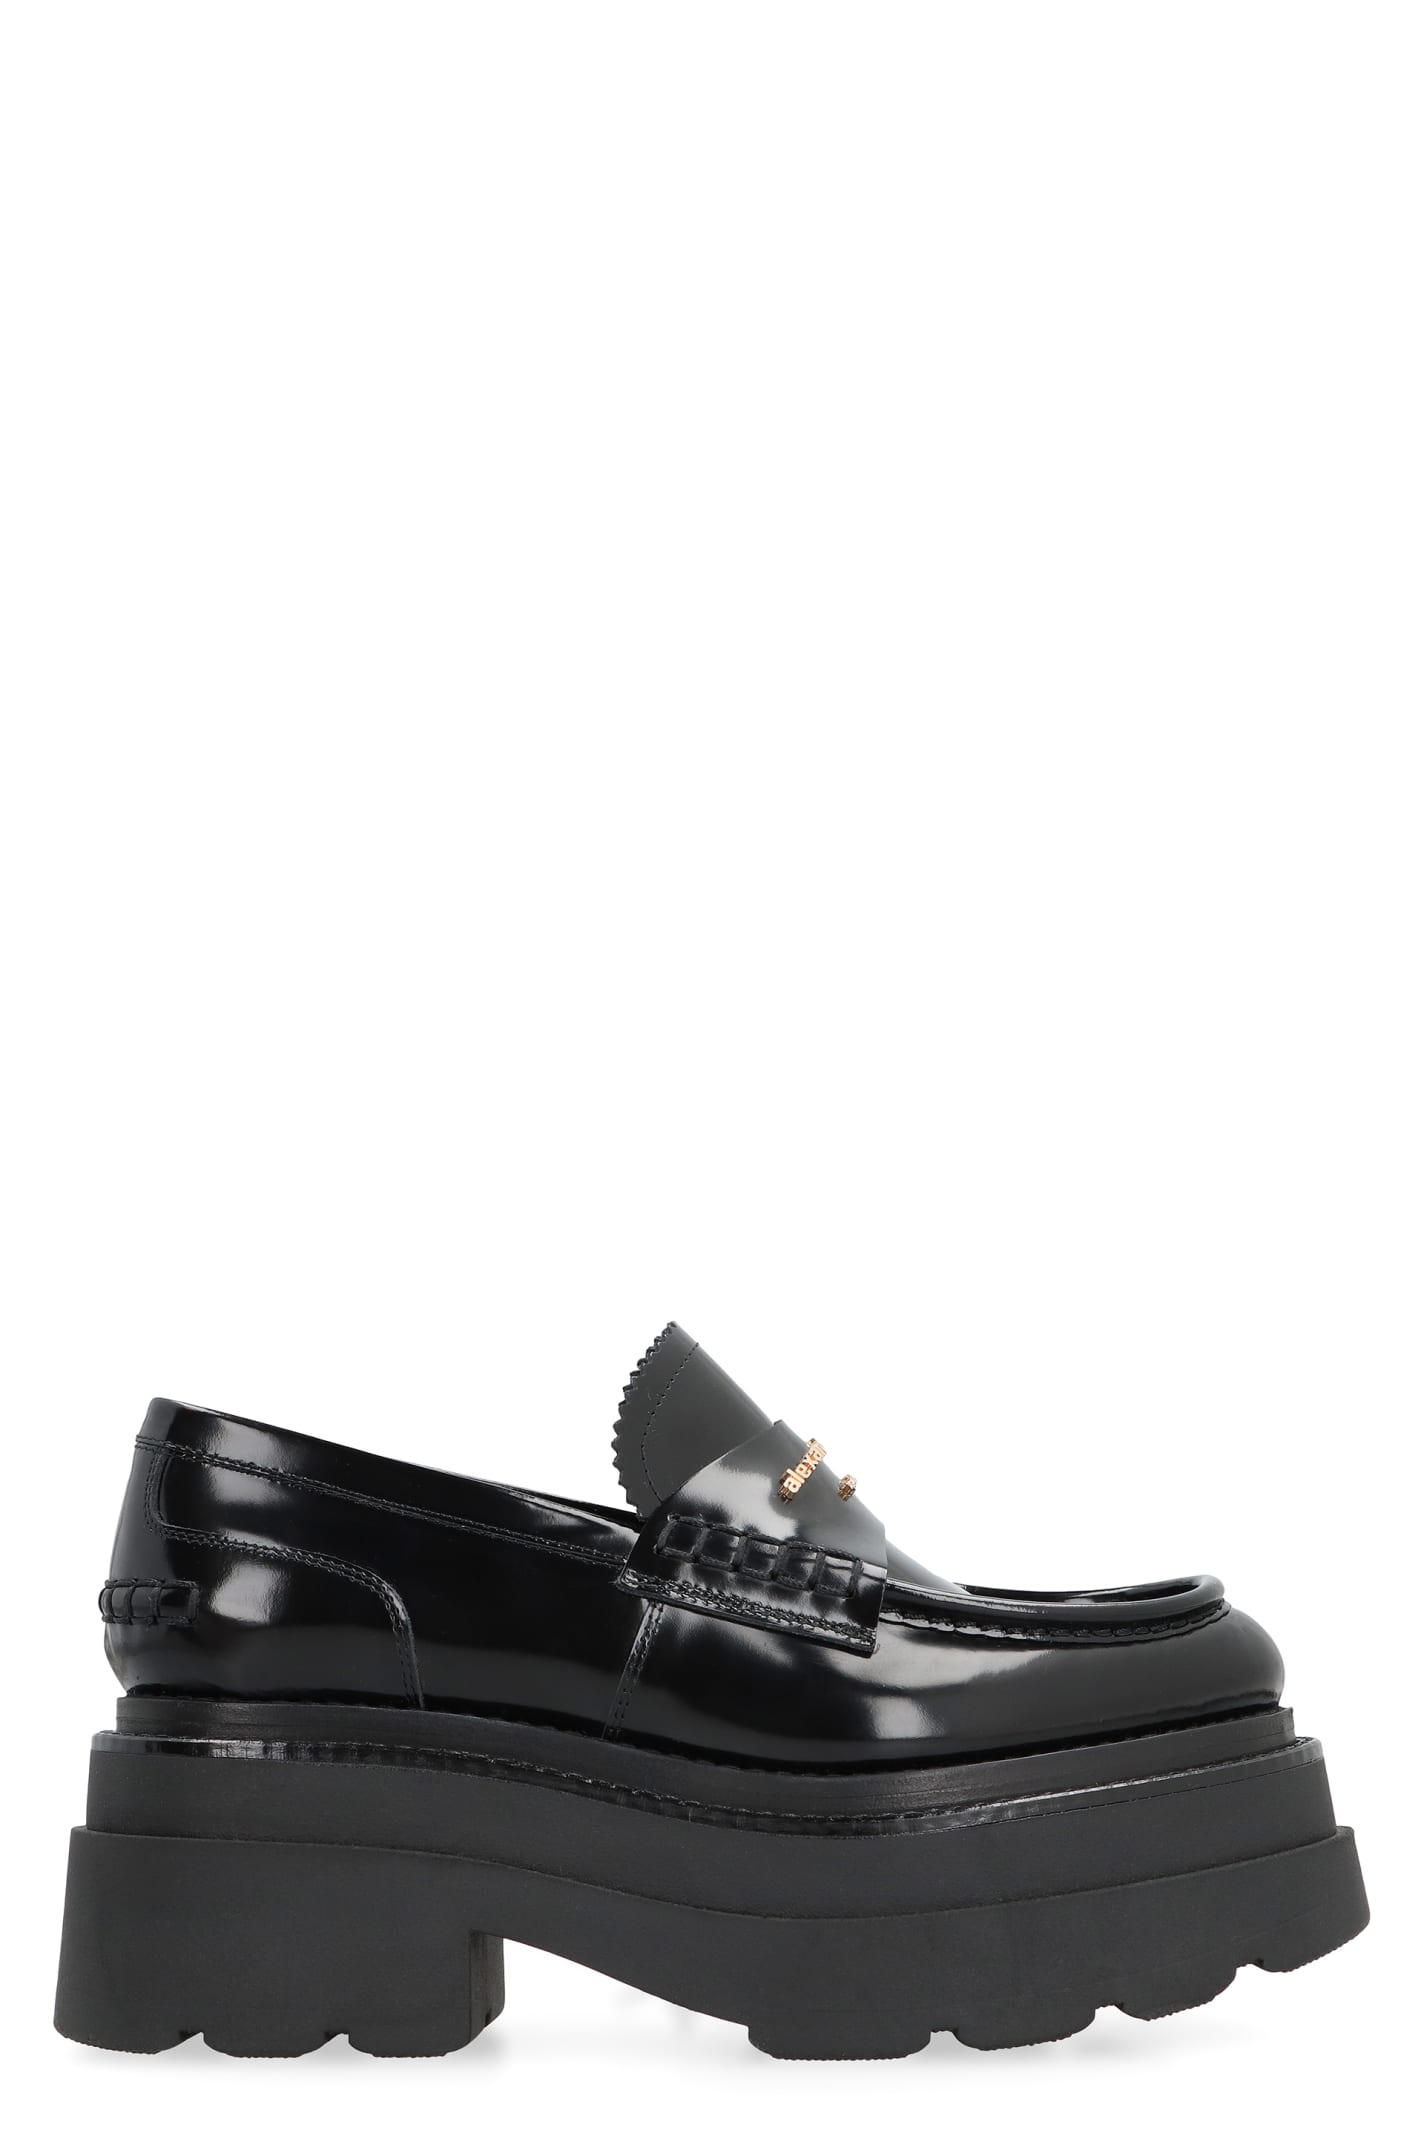 Alexander Wang Carter Leather Loafers